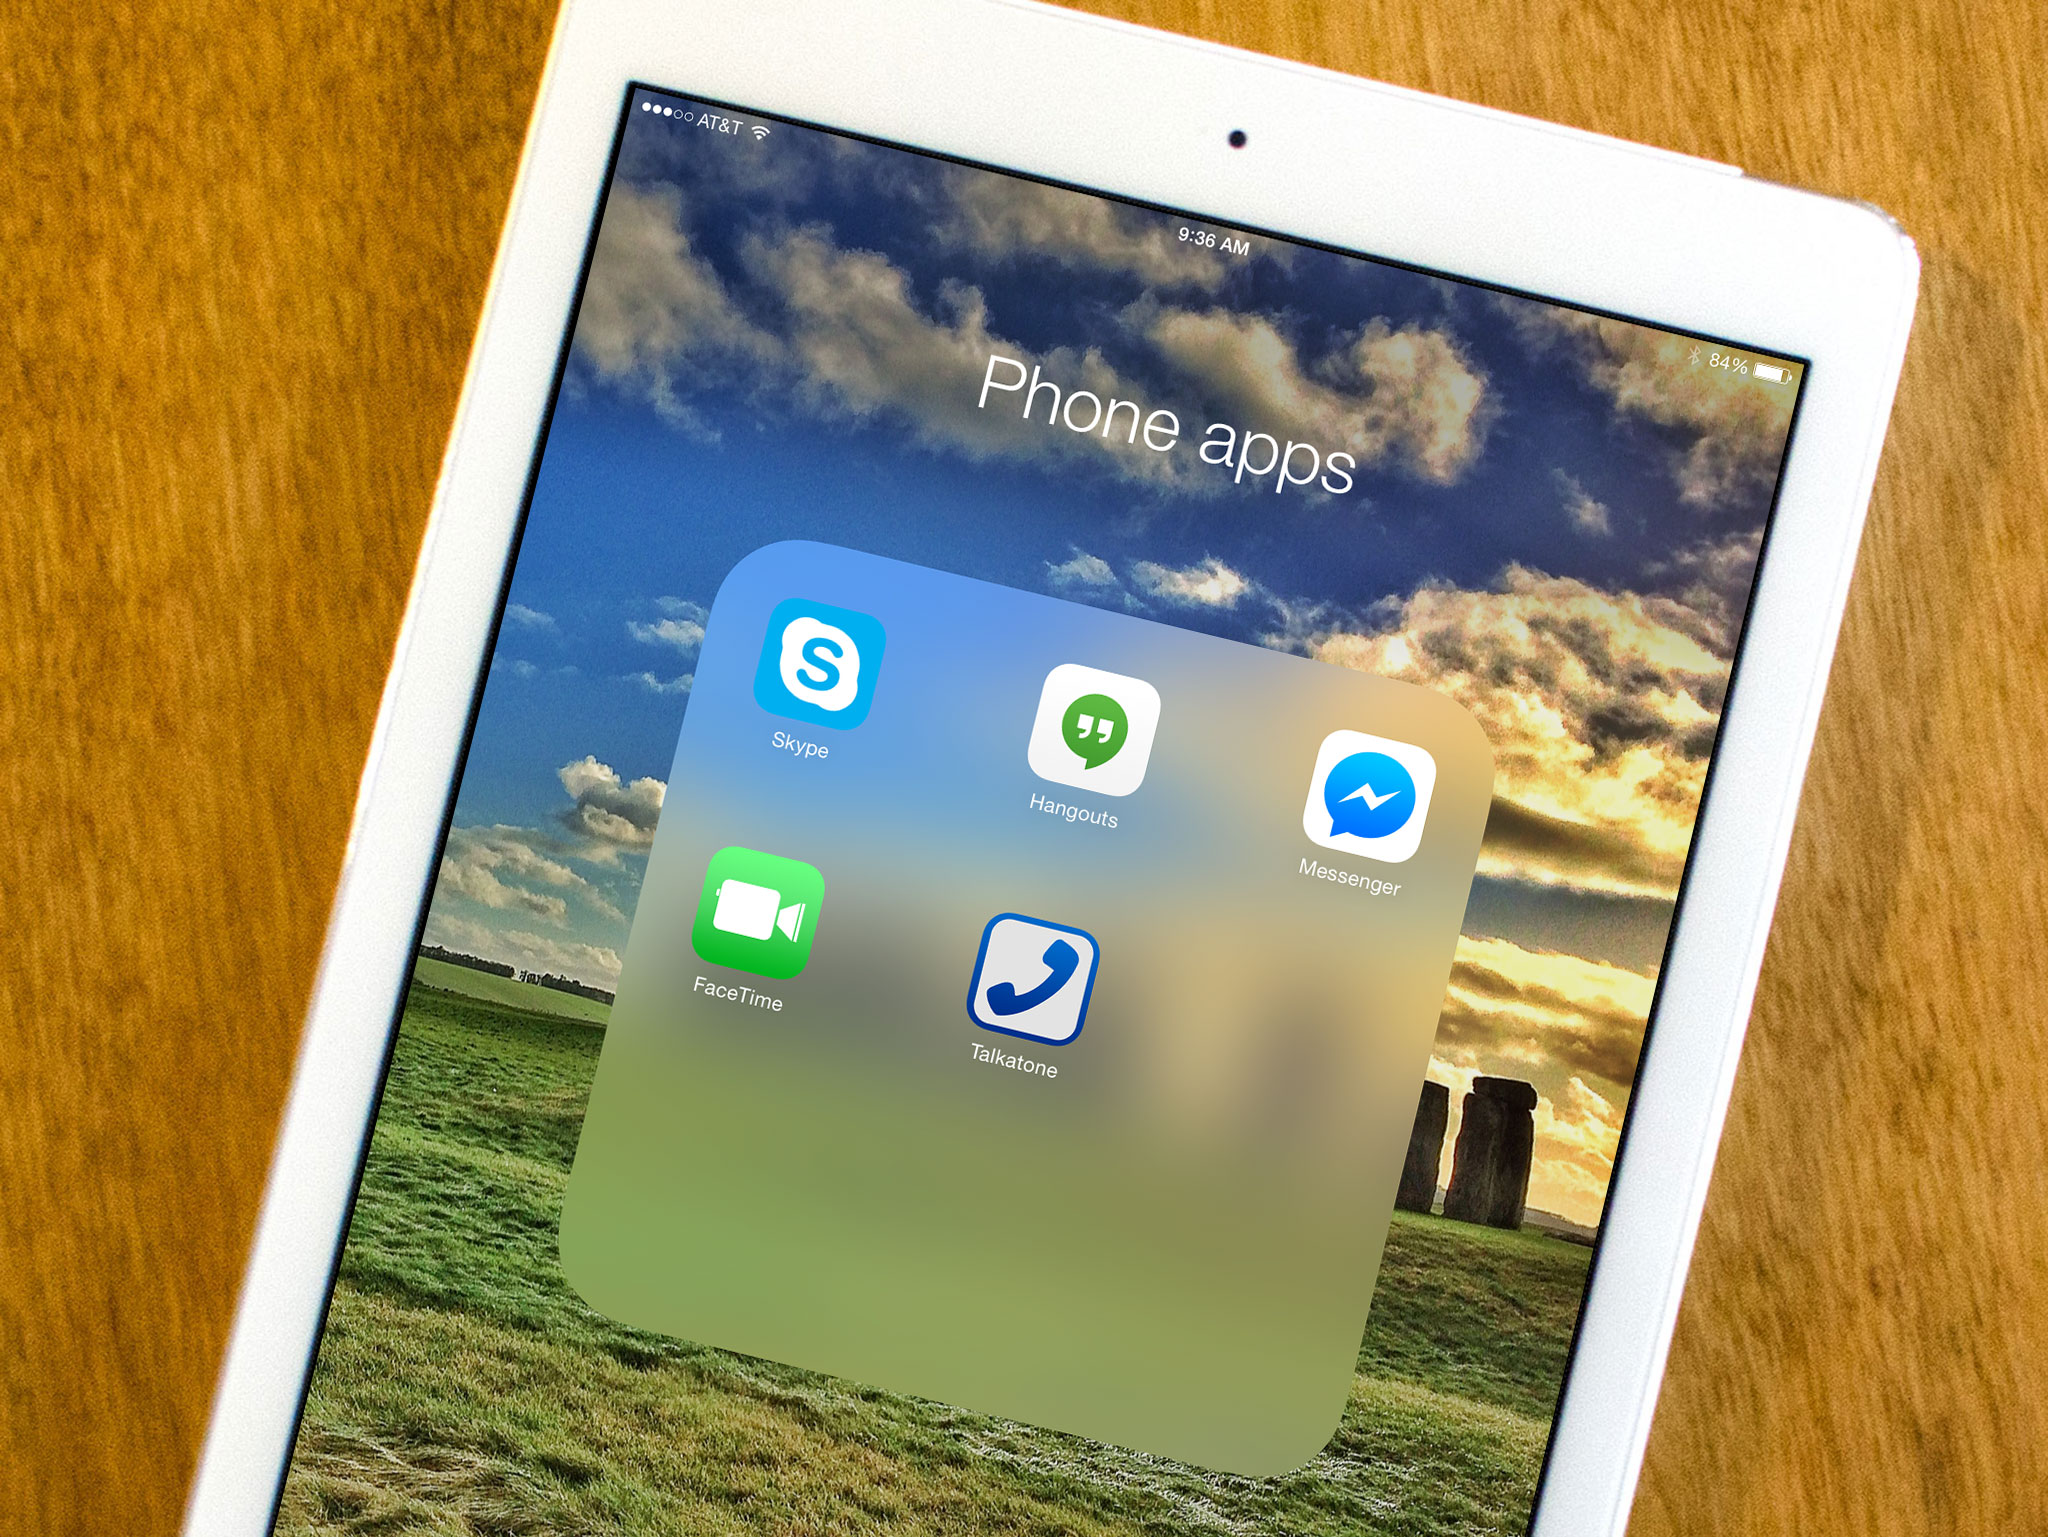 Best phone apps for iPad: FaceTime Audio, Google Hangouts, Skype, and more!